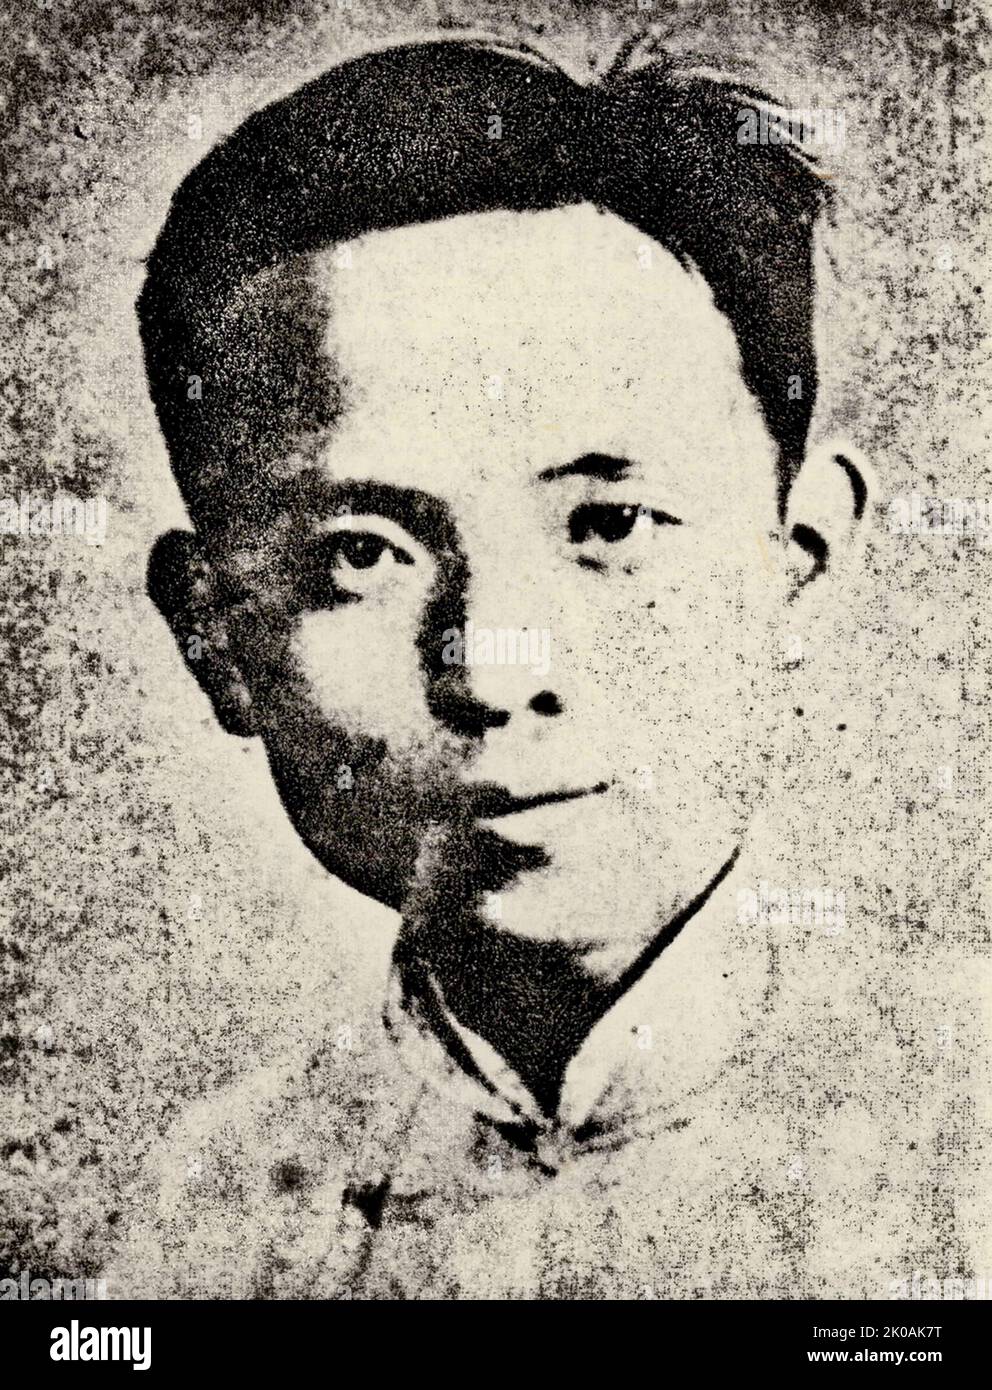 Wang Jin (1921-1939), from Dixian, Shanxi province. After the Japanese invasion took place, Huo Tu sold his land for military food and started Anti-Japanese activities in Hai men, Qi dong. In the summer of 1938. Huo went to Chongming (Shanghai) to mobilize armed uprisings. They later formed the unified 'Chongming Guerrilla Headquarters', successfully defeating the Japanese. In January of 1939, Wang and Huo were murdered by Kuomintang. Stock Photo